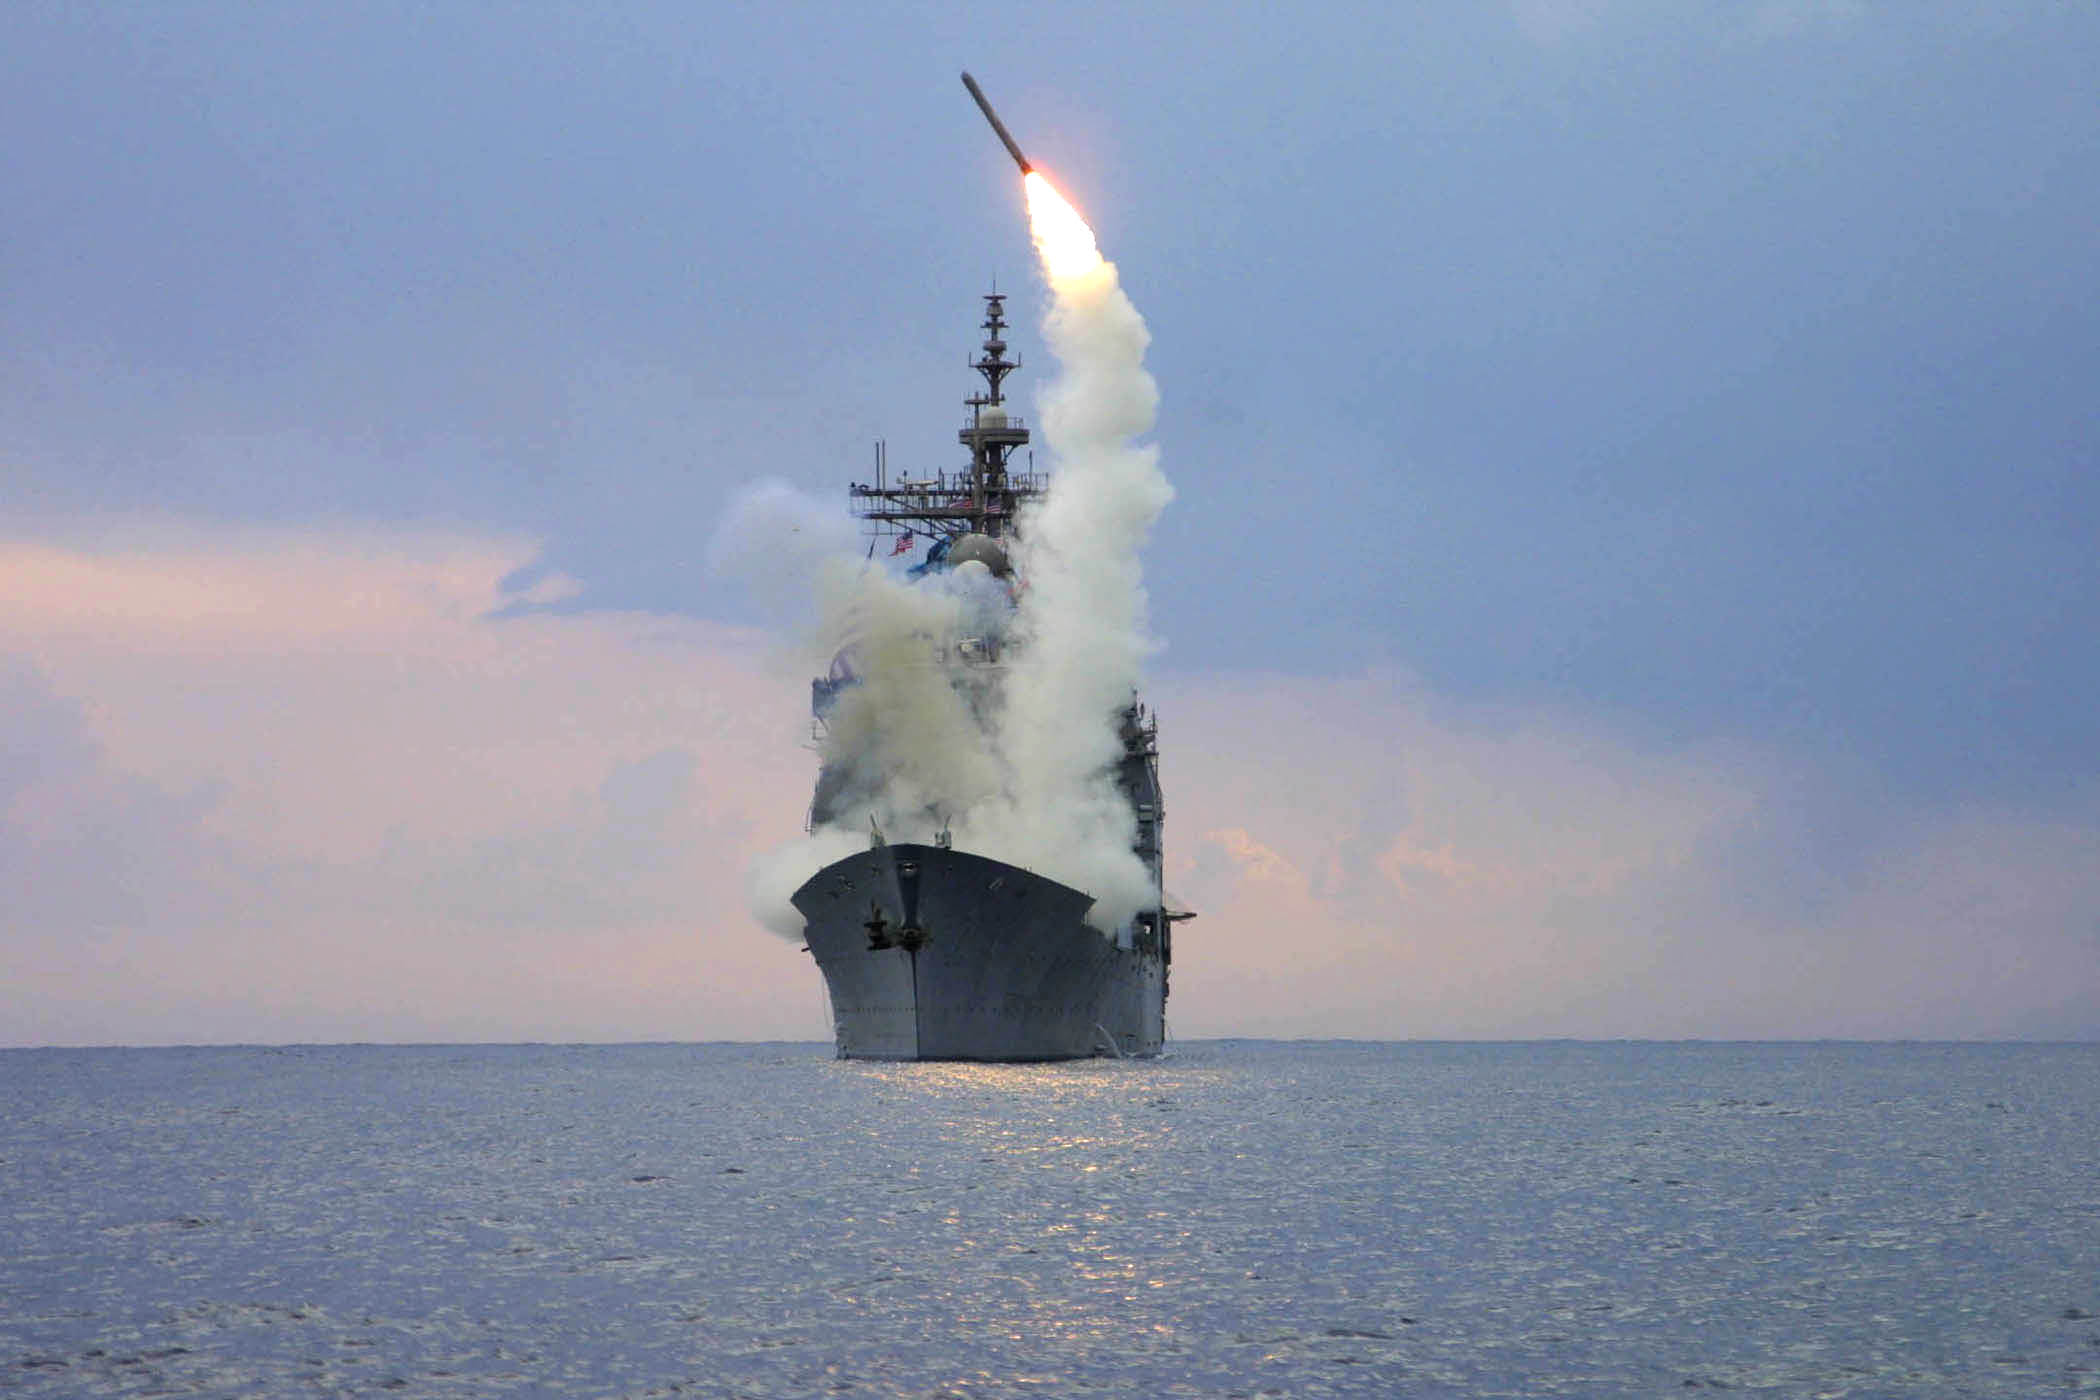 USS Cape St. George launches a Tomahawk cruise missile